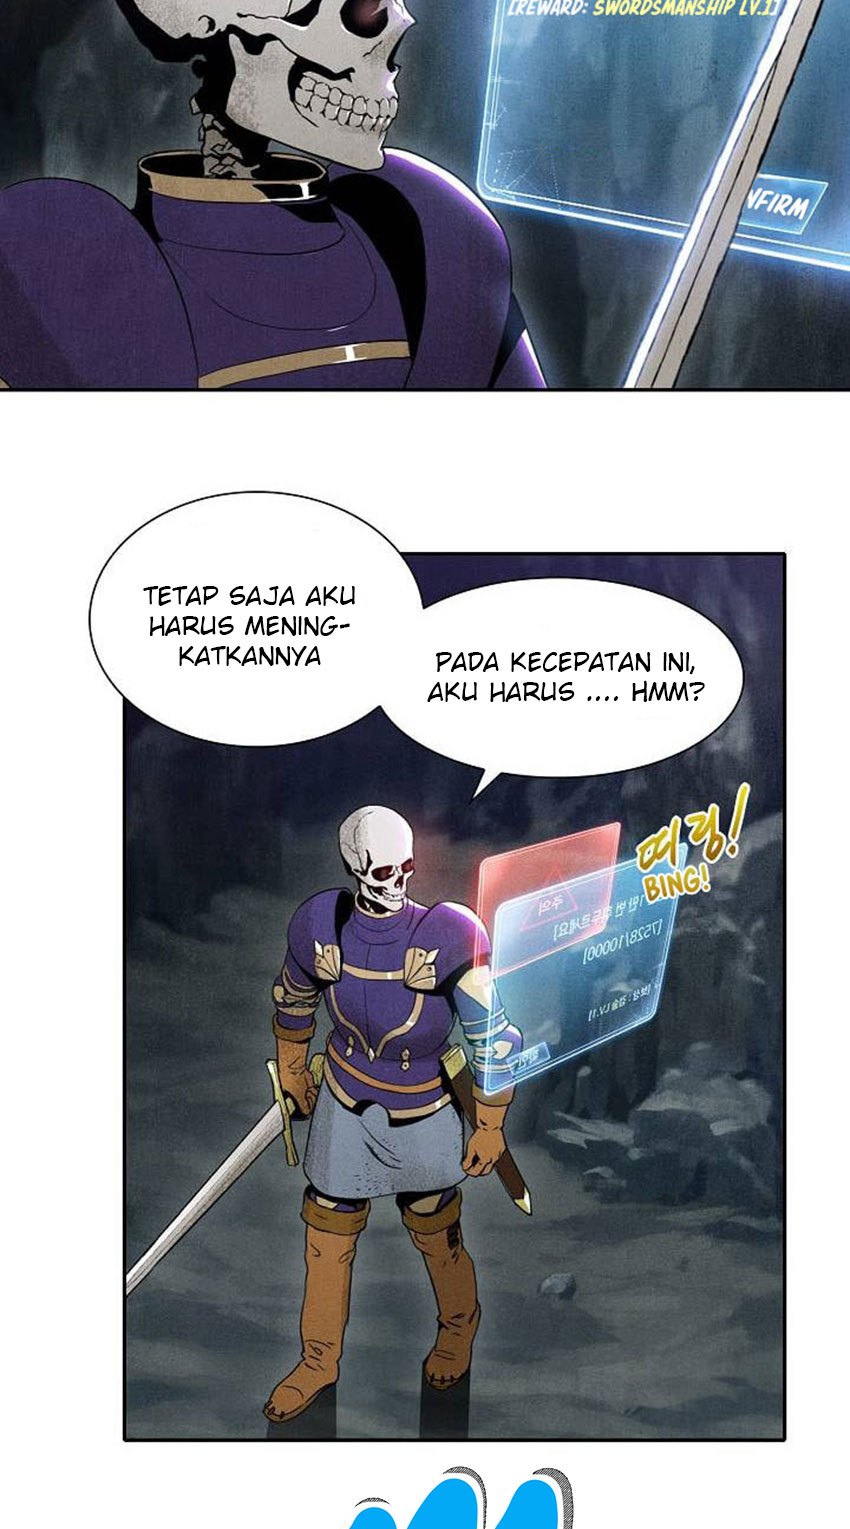 Skeleton Soldier Couldn’t Protect the Dungeon Chapter 06